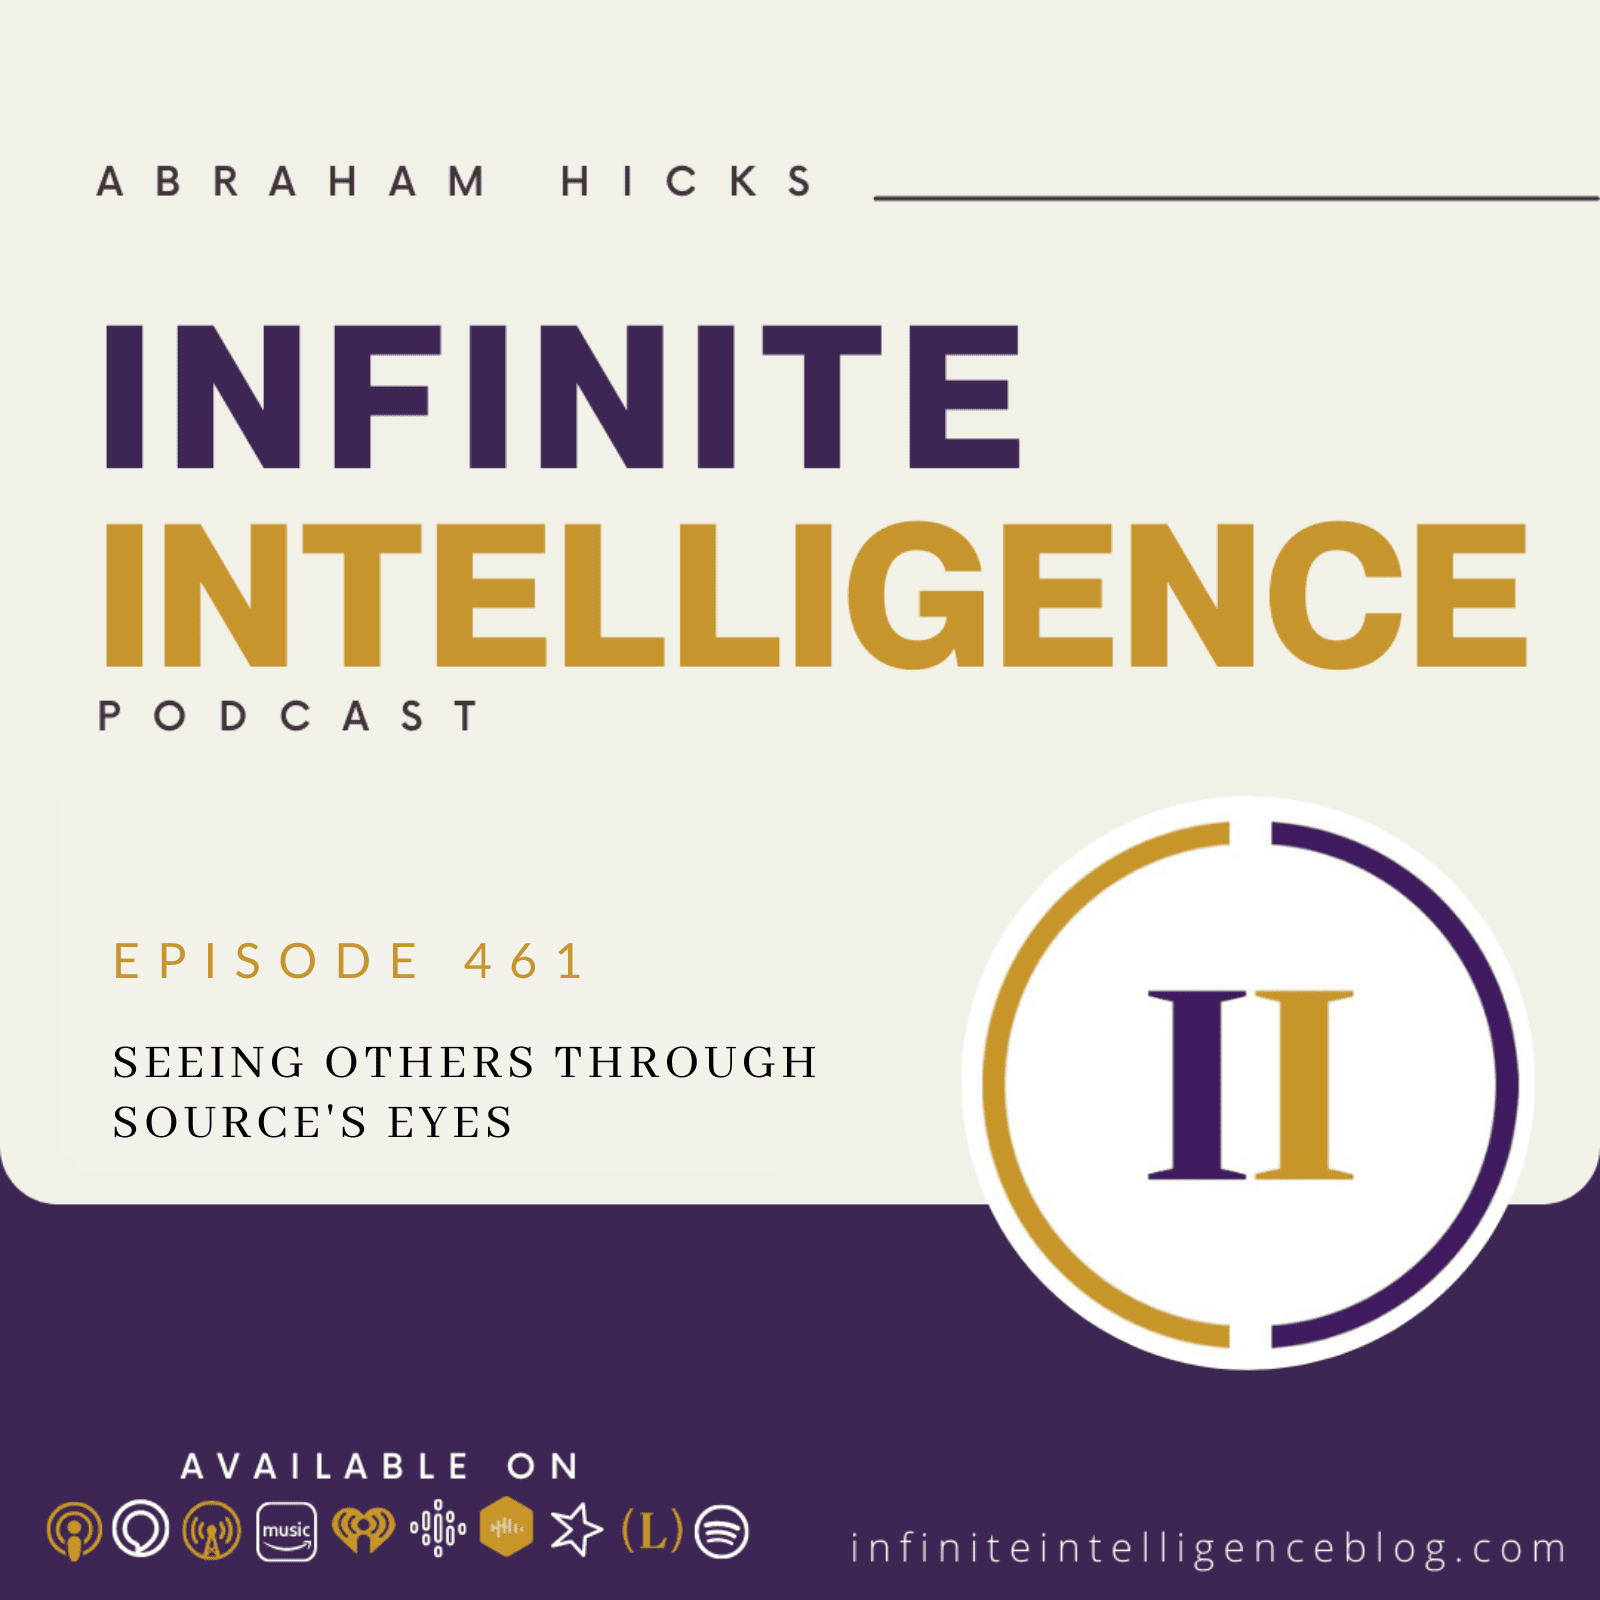 Infinite Intelligence Podcast Episode #461 – Seeing Others Through Source’s Eyes